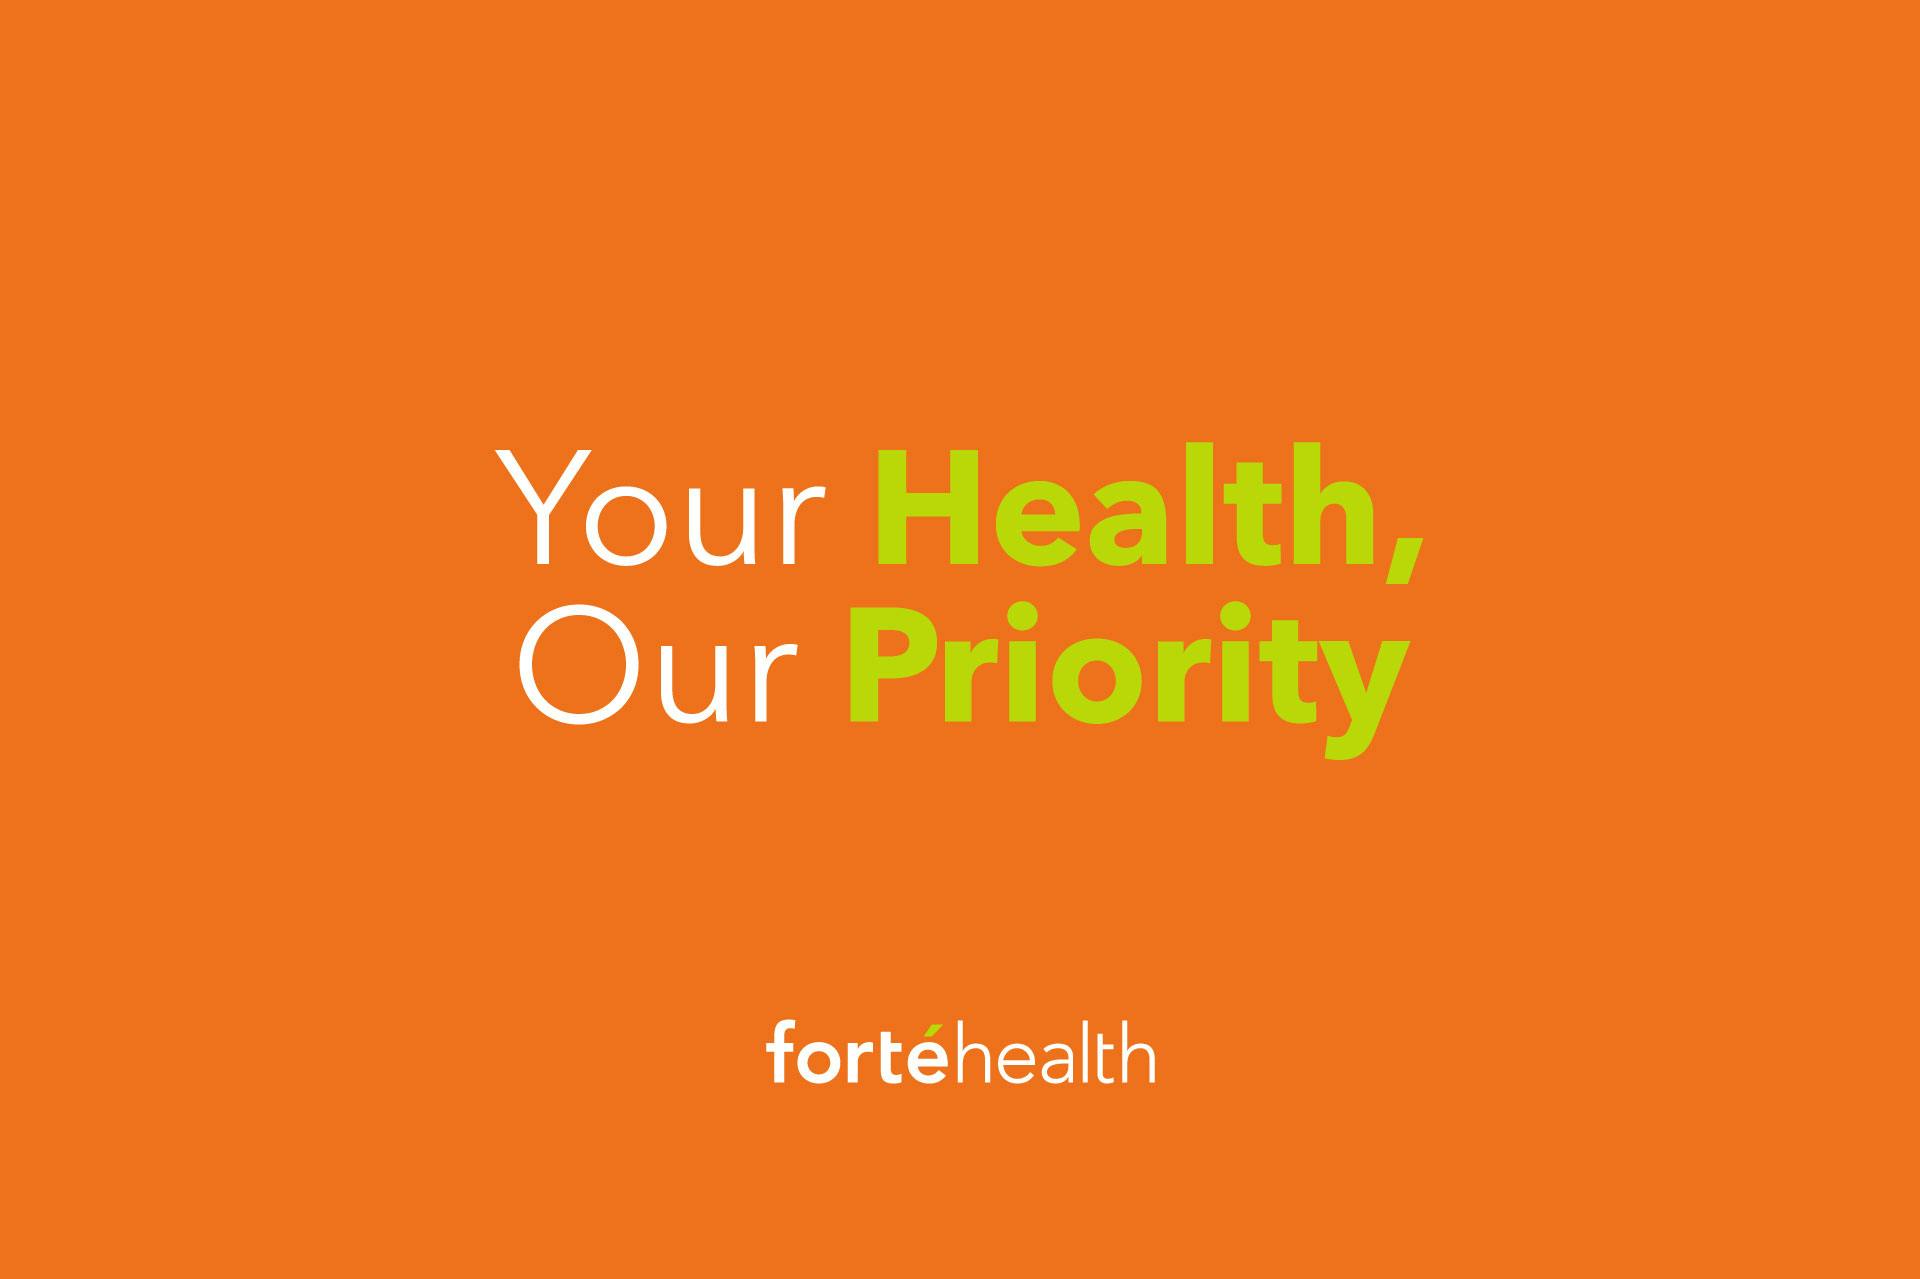 Your Health, Our Priority